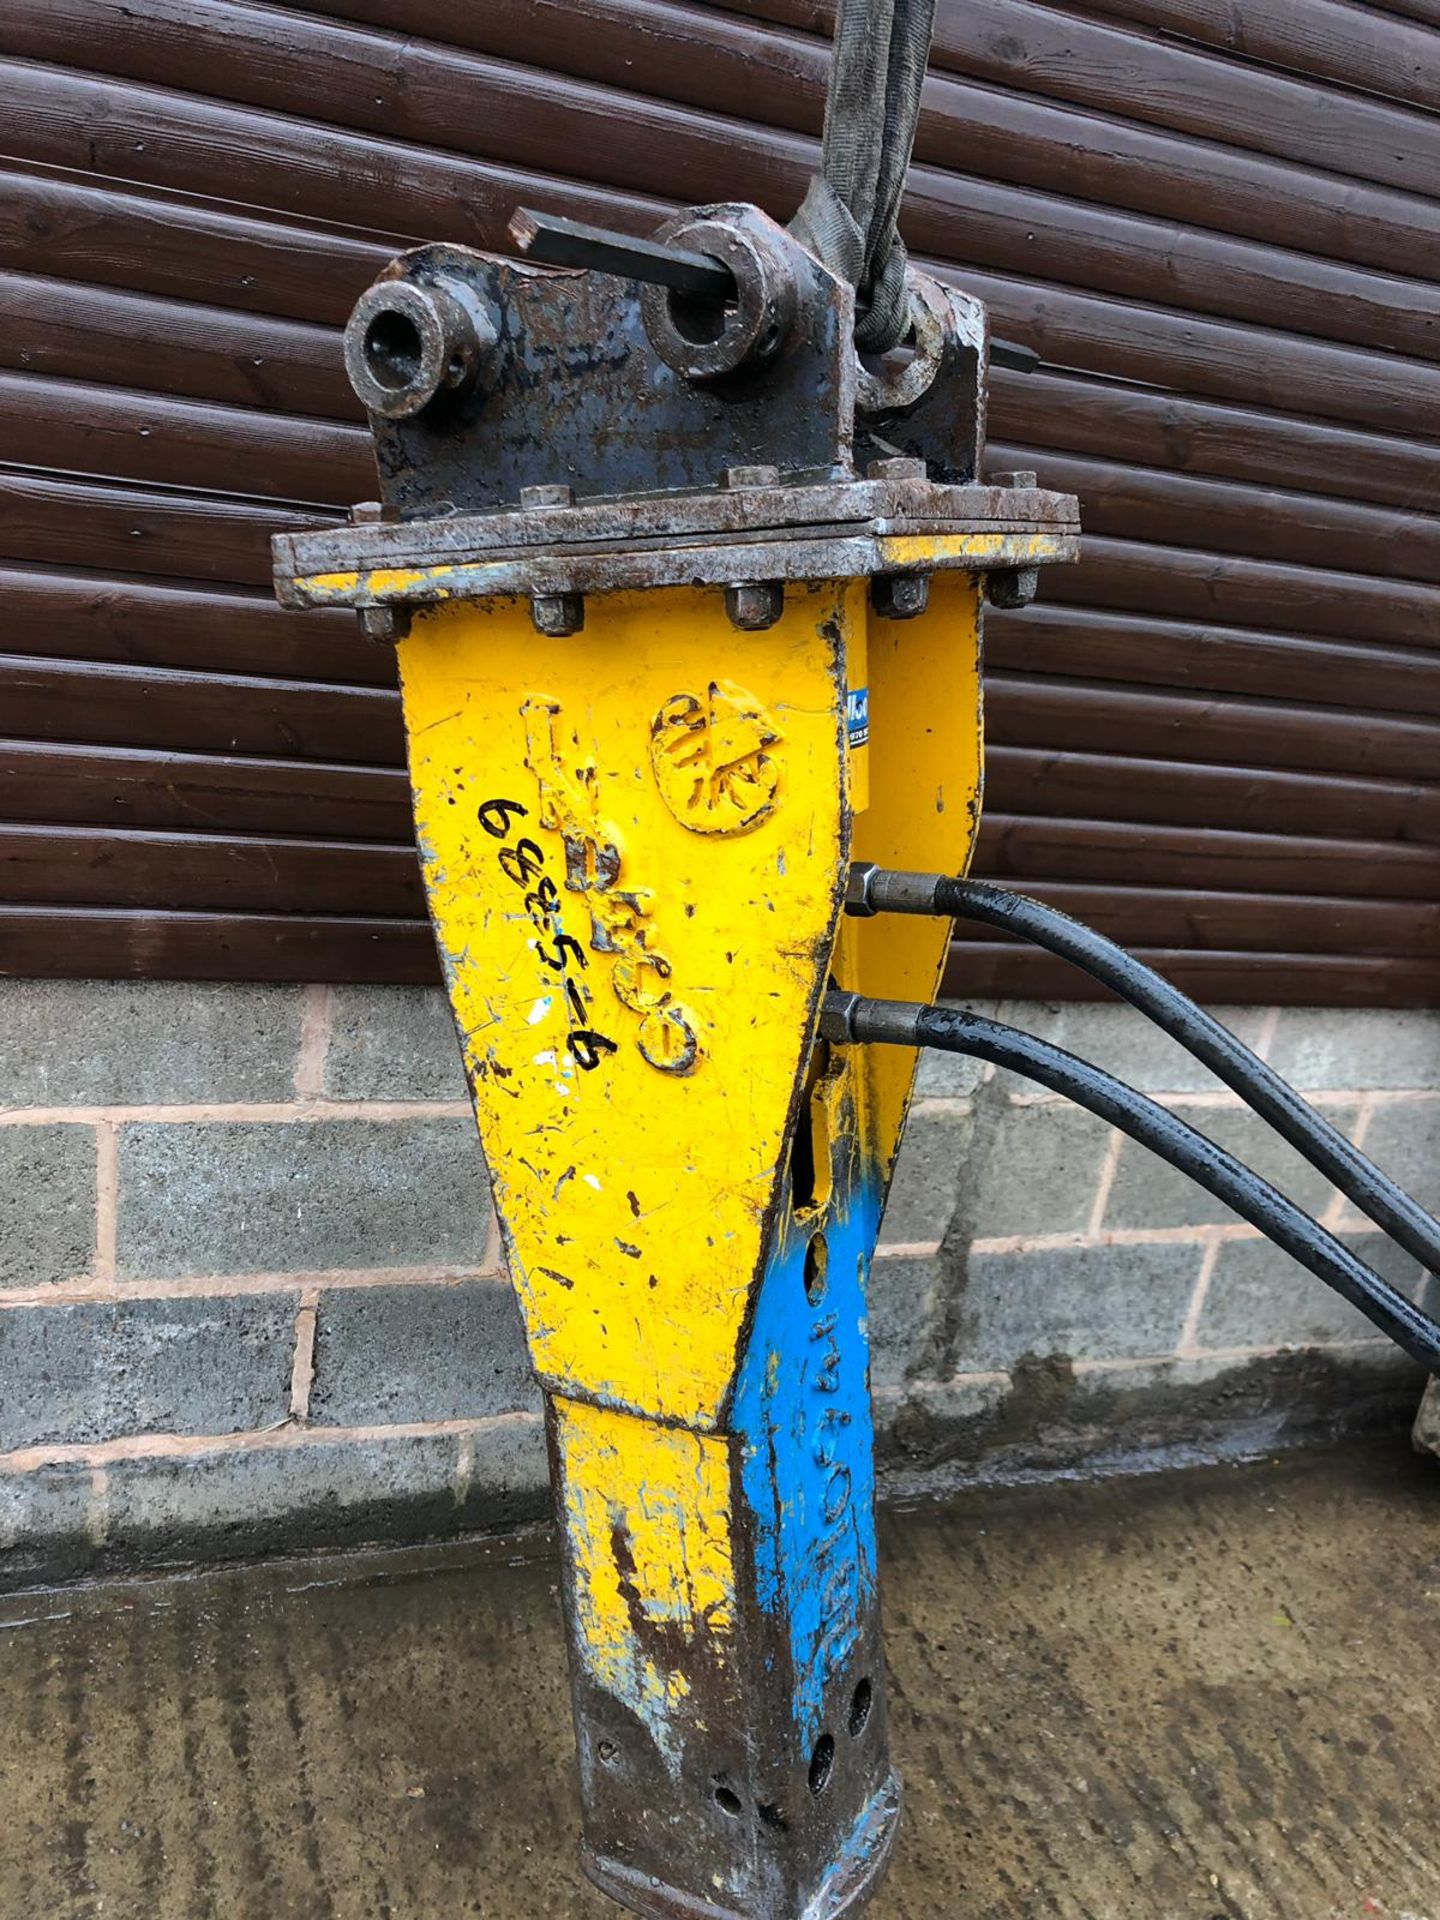 Indeco HP350 Hydraulic Breaker - Image 4 of 5